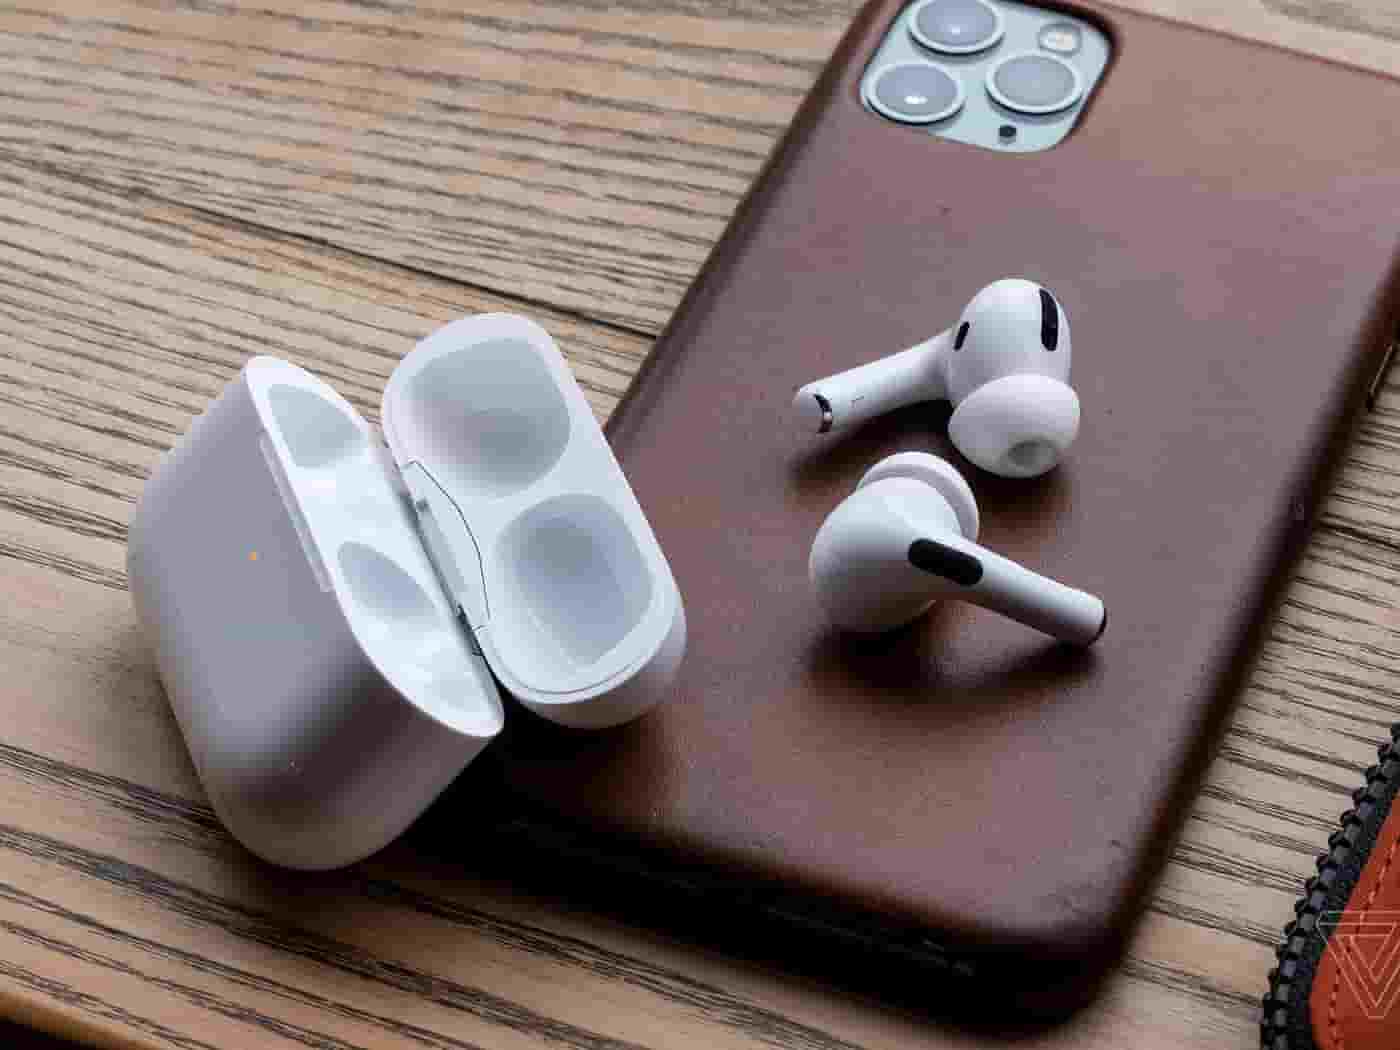 Real airpods